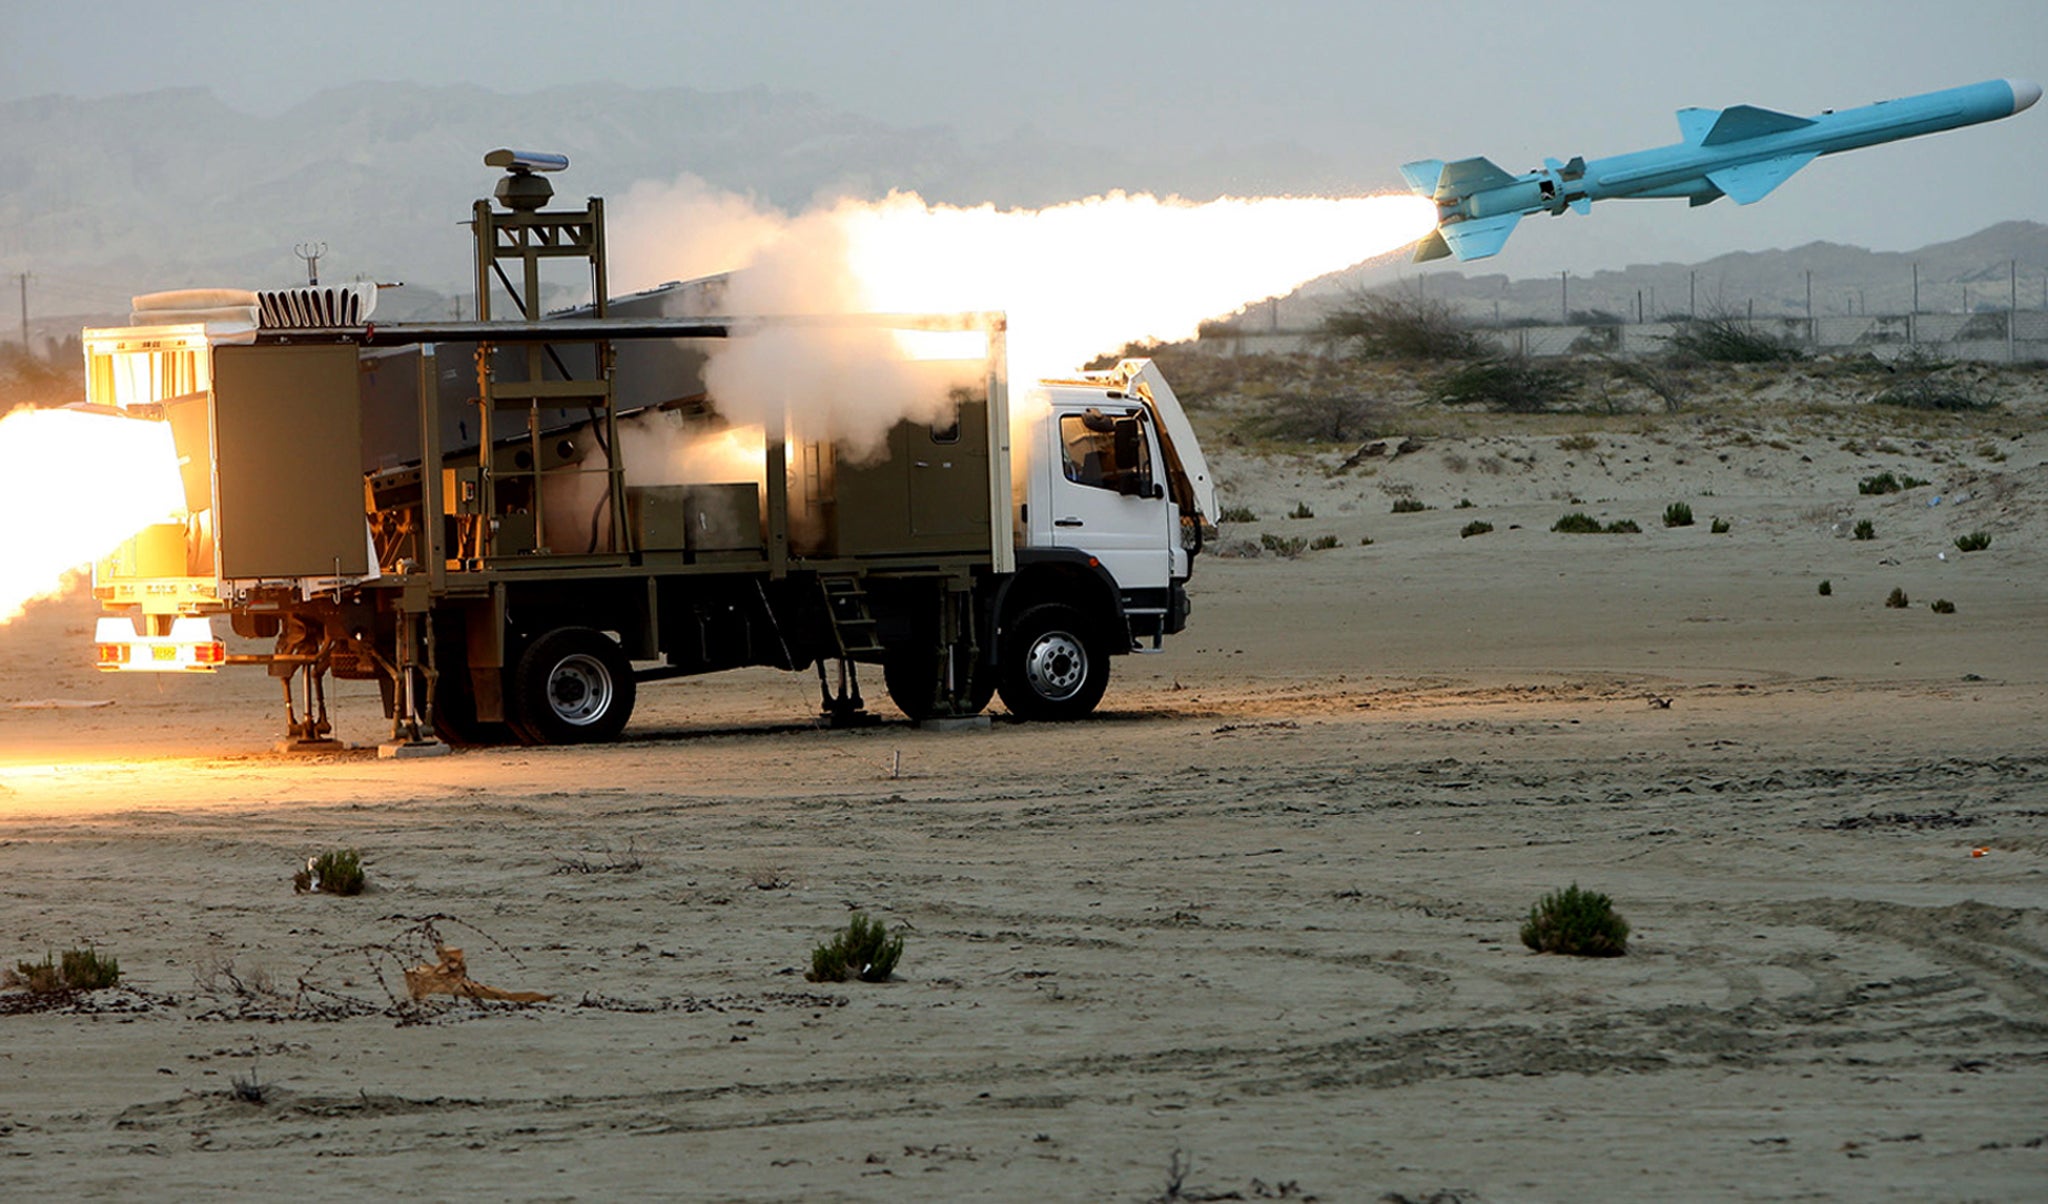 An Iranian Noor missile is launched during war games on April 25, 2010 in southern Iran, near the Strait of Hormuz, the narrow strategically located waterway through which 40 percent of world's seaborne oil supplies pass. Iran's elite Revolutionary Guards fired five missiles as part of an ongoing three-day military drill, with Fars news agency naming two of those tested as the Noor (Light) and Nasr (Victory) missiles. The Islamic republic's missile programme has raised concerns in the West which is already at loggerheads with Tehran over its controversial nuclear project. AFP PHOTO/FARS NEWS/MEHDI MARIZAD (Photo credit should read MEHDI MARIZAD/AFP via Getty Images)